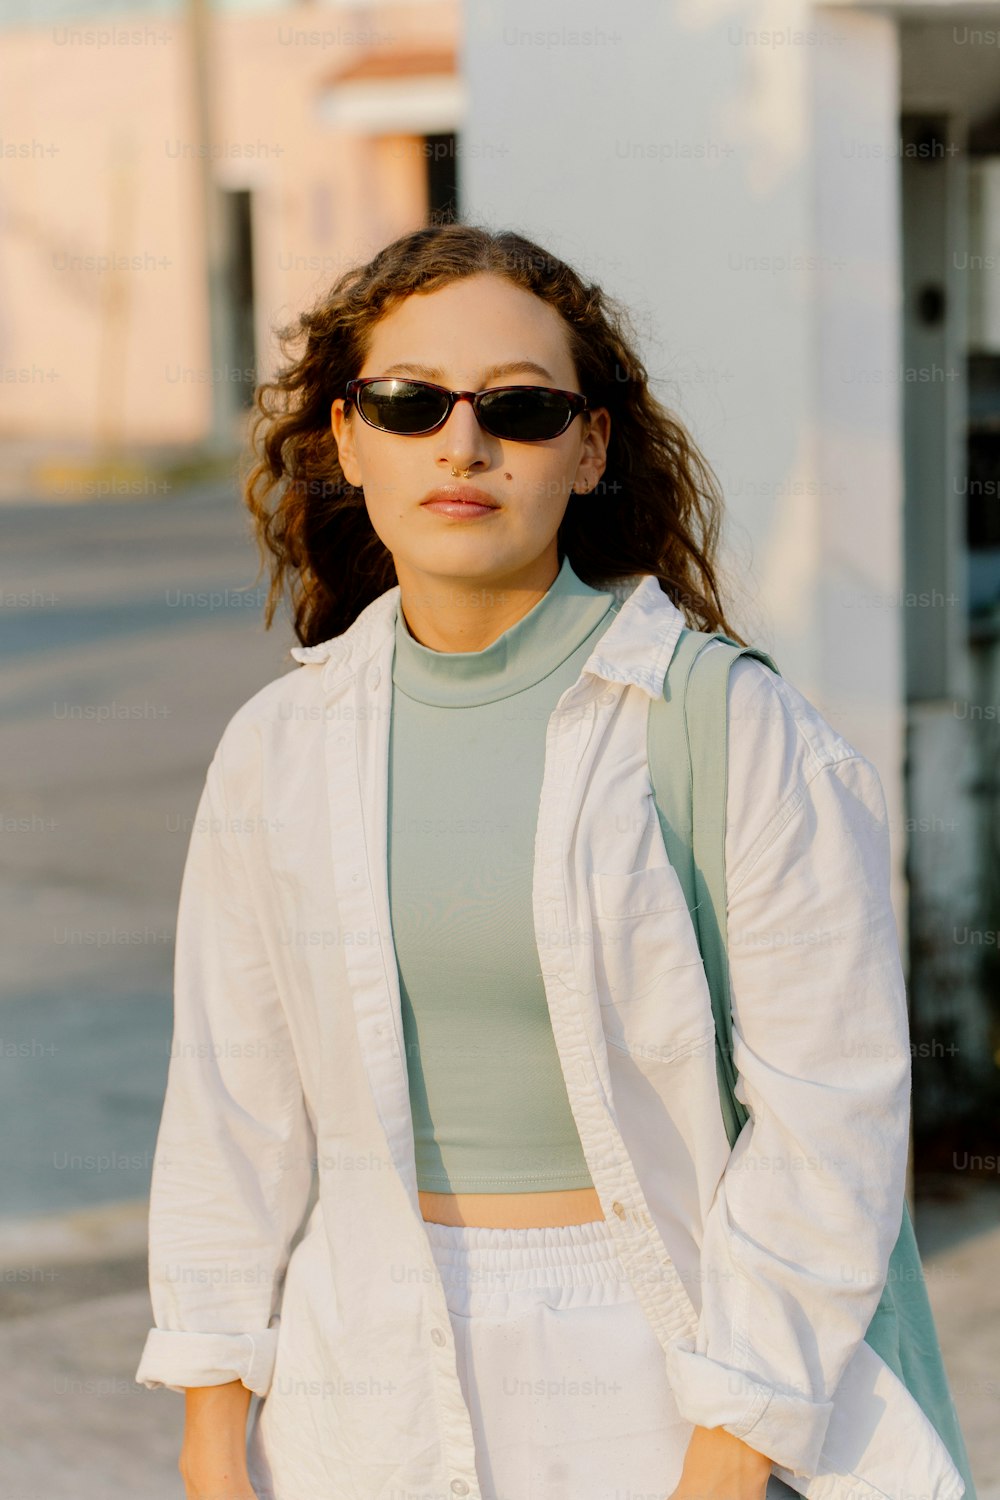 a woman wearing sunglasses and a white jacket